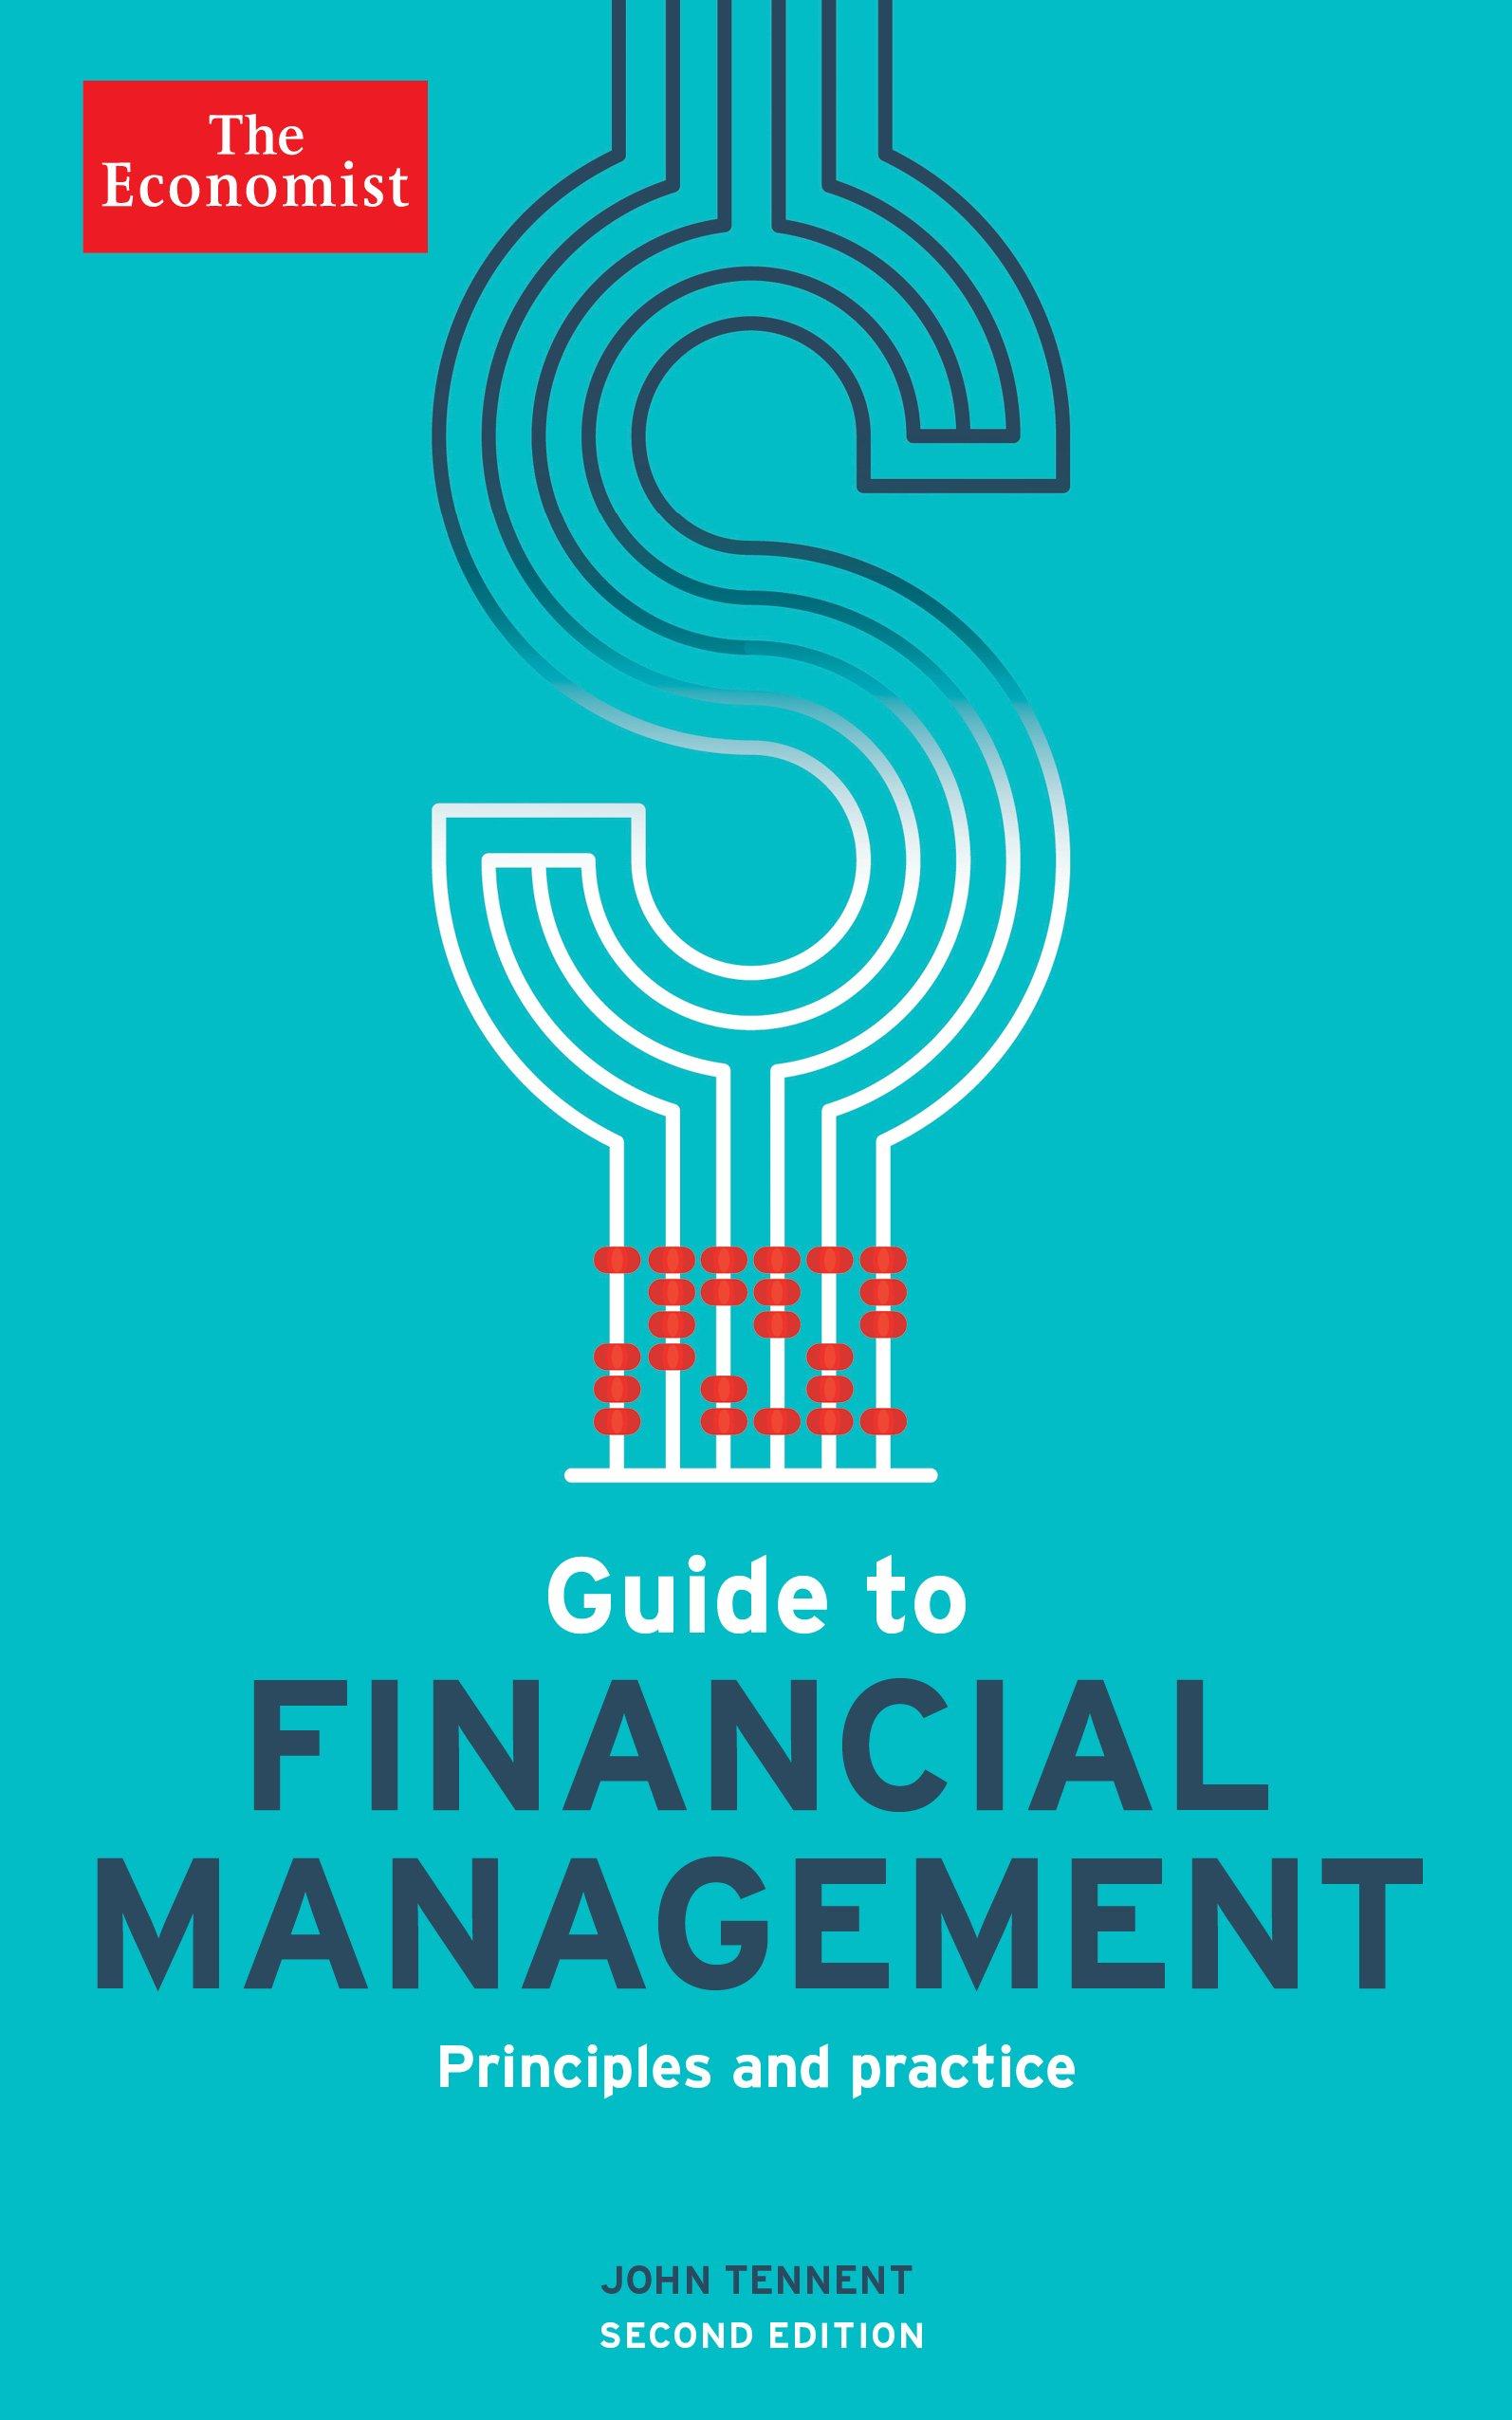 the economist guide to financial management principles and practice 1st edition john tennent 1781252068,